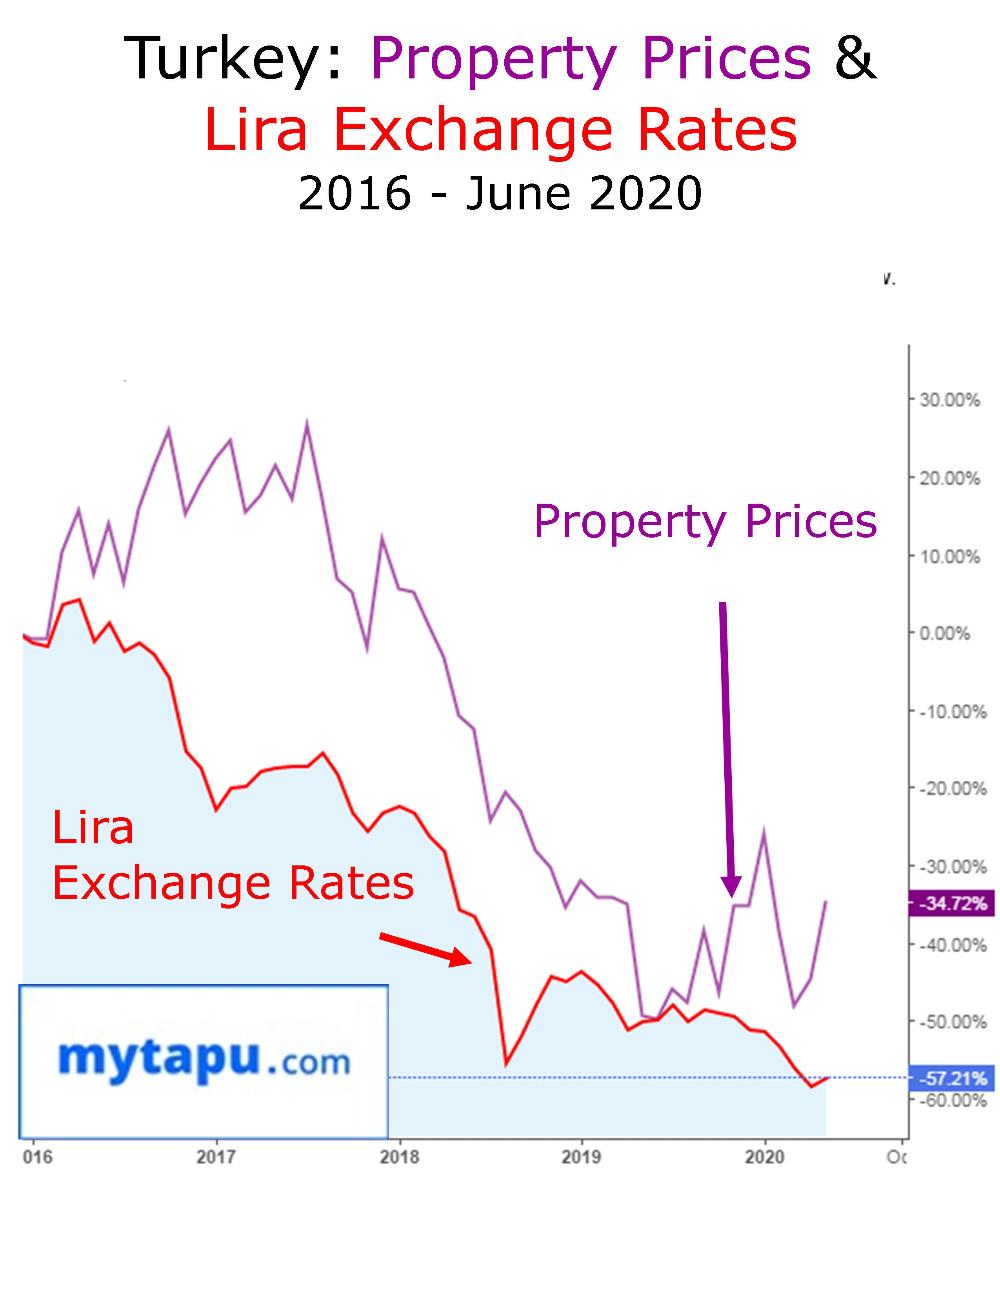 Turkey Residential Real Estate Property Market Outlook Trends, Forecasts, and Turkish Lira Exchange Rates 2016 to June 2020